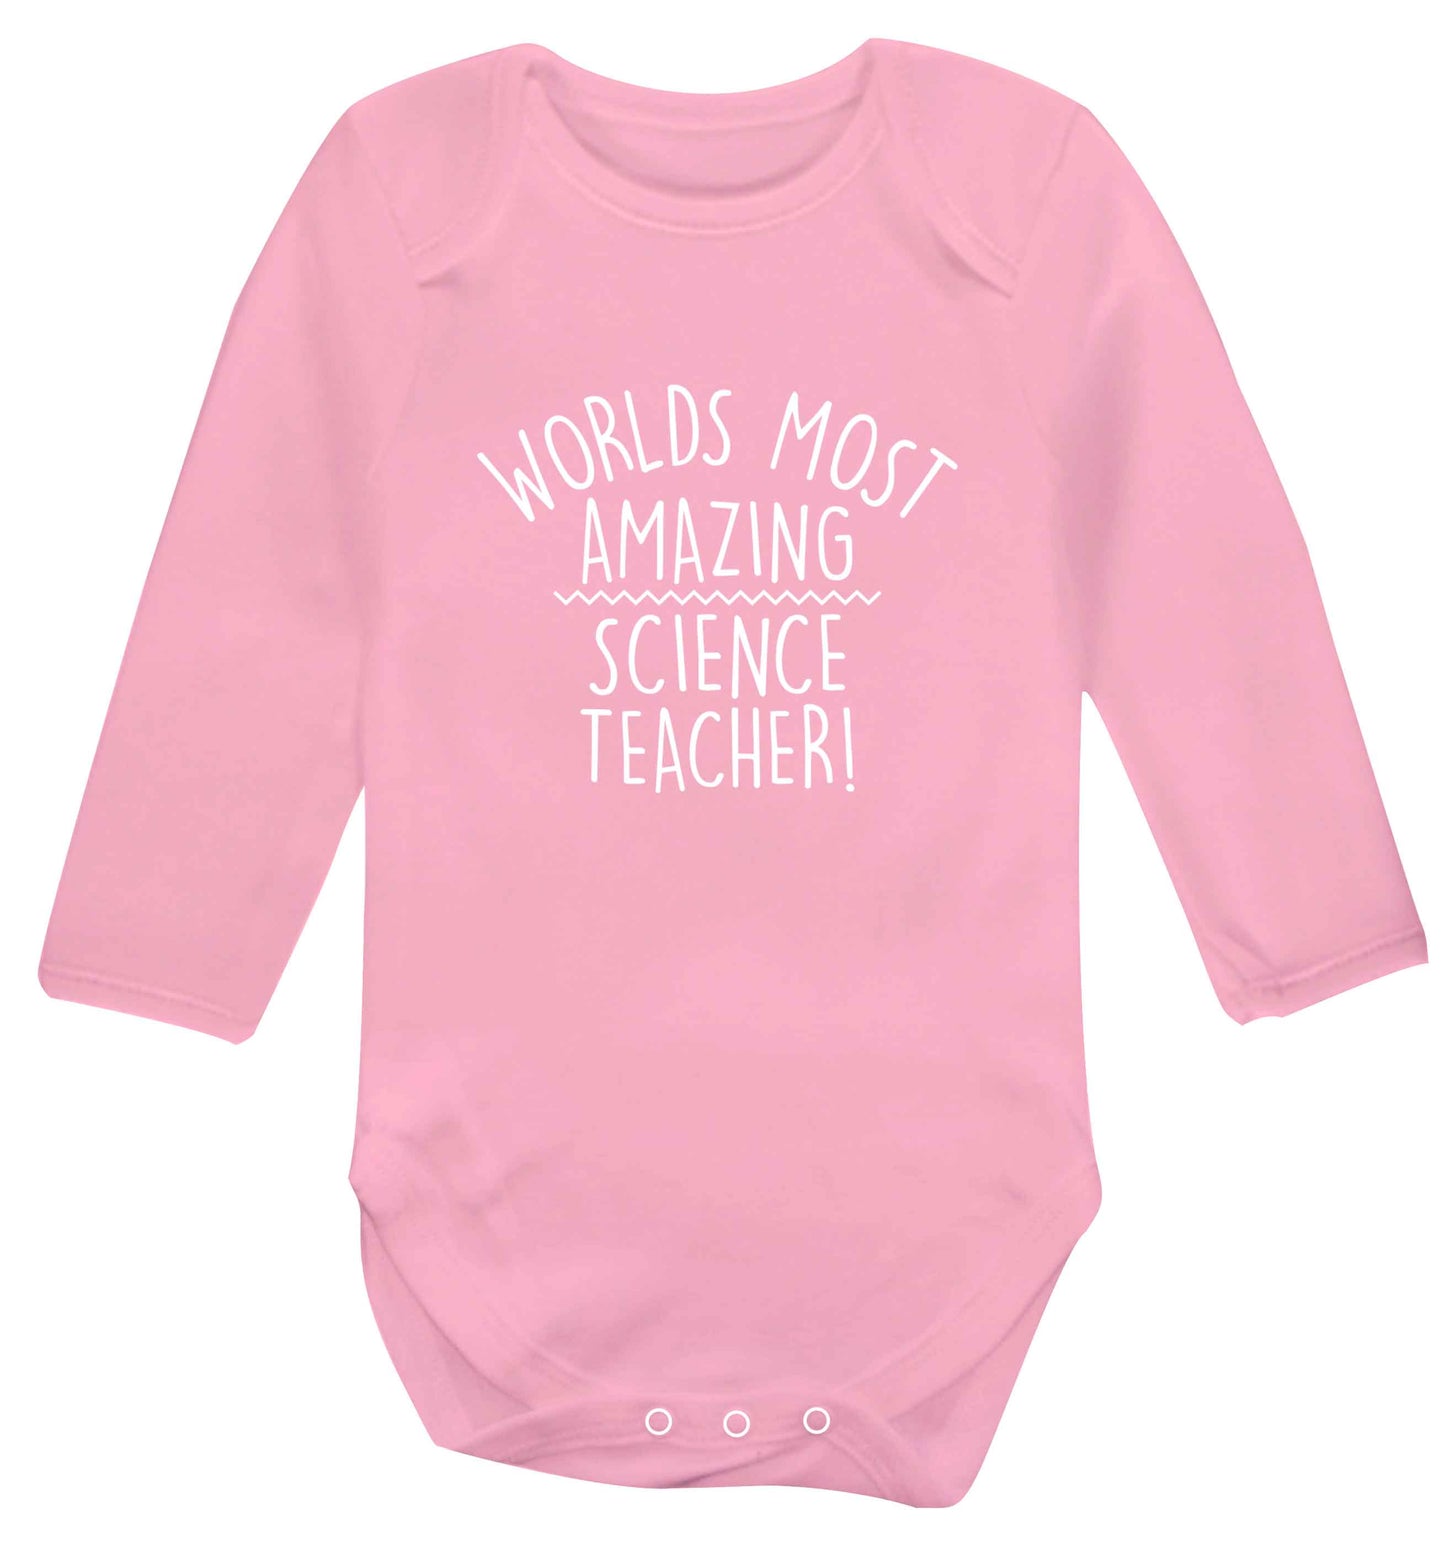 Worlds most amazing science teacher baby vest long sleeved pale pink 6-12 months